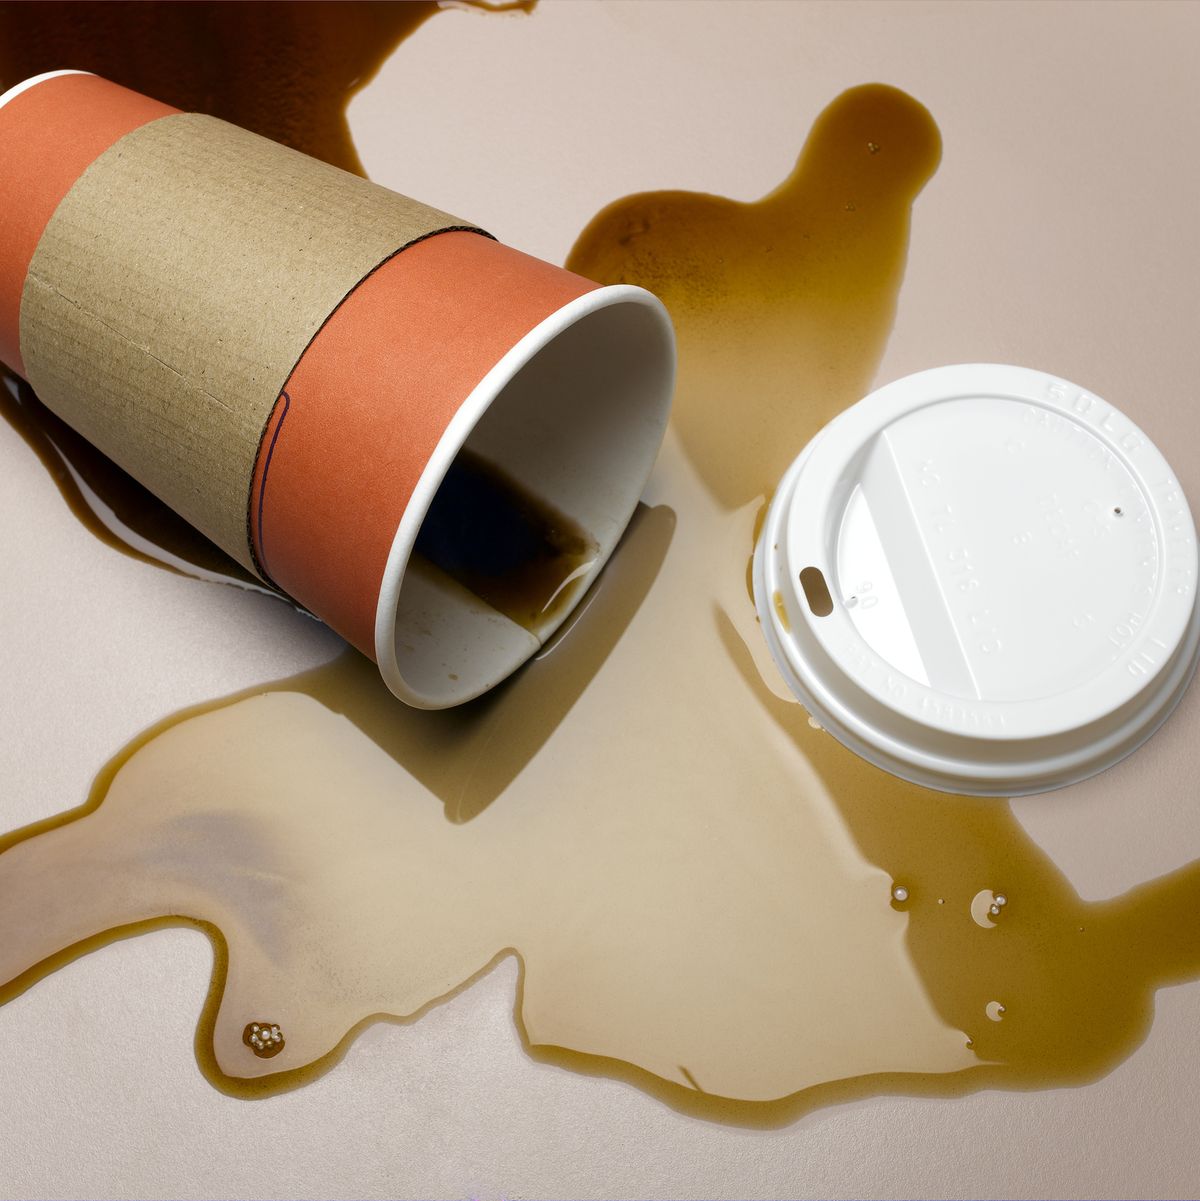 This Thing Makes It Impossible To Spill Your Coffee 